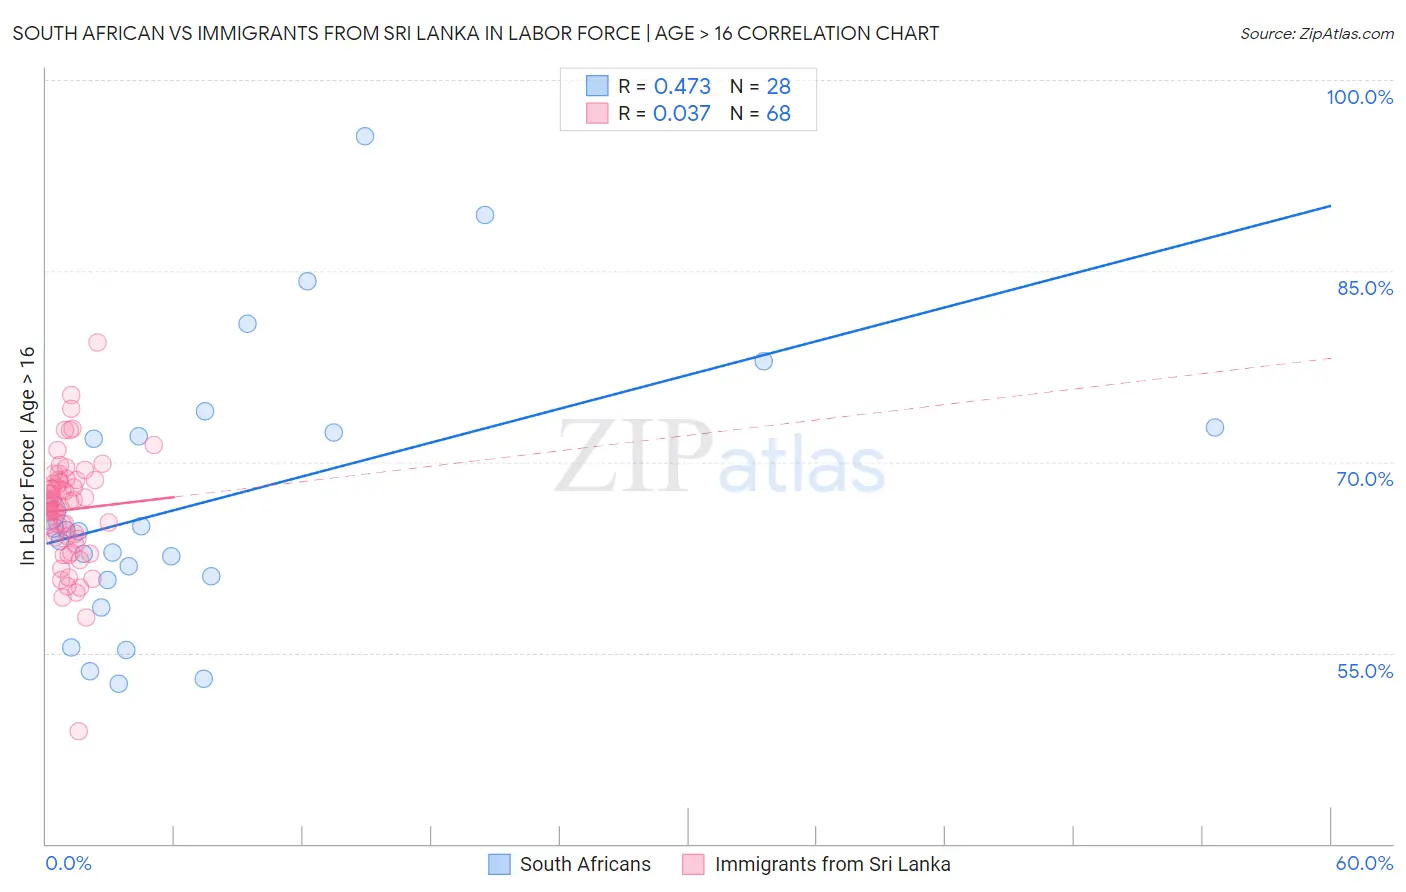 South African vs Immigrants from Sri Lanka In Labor Force | Age > 16